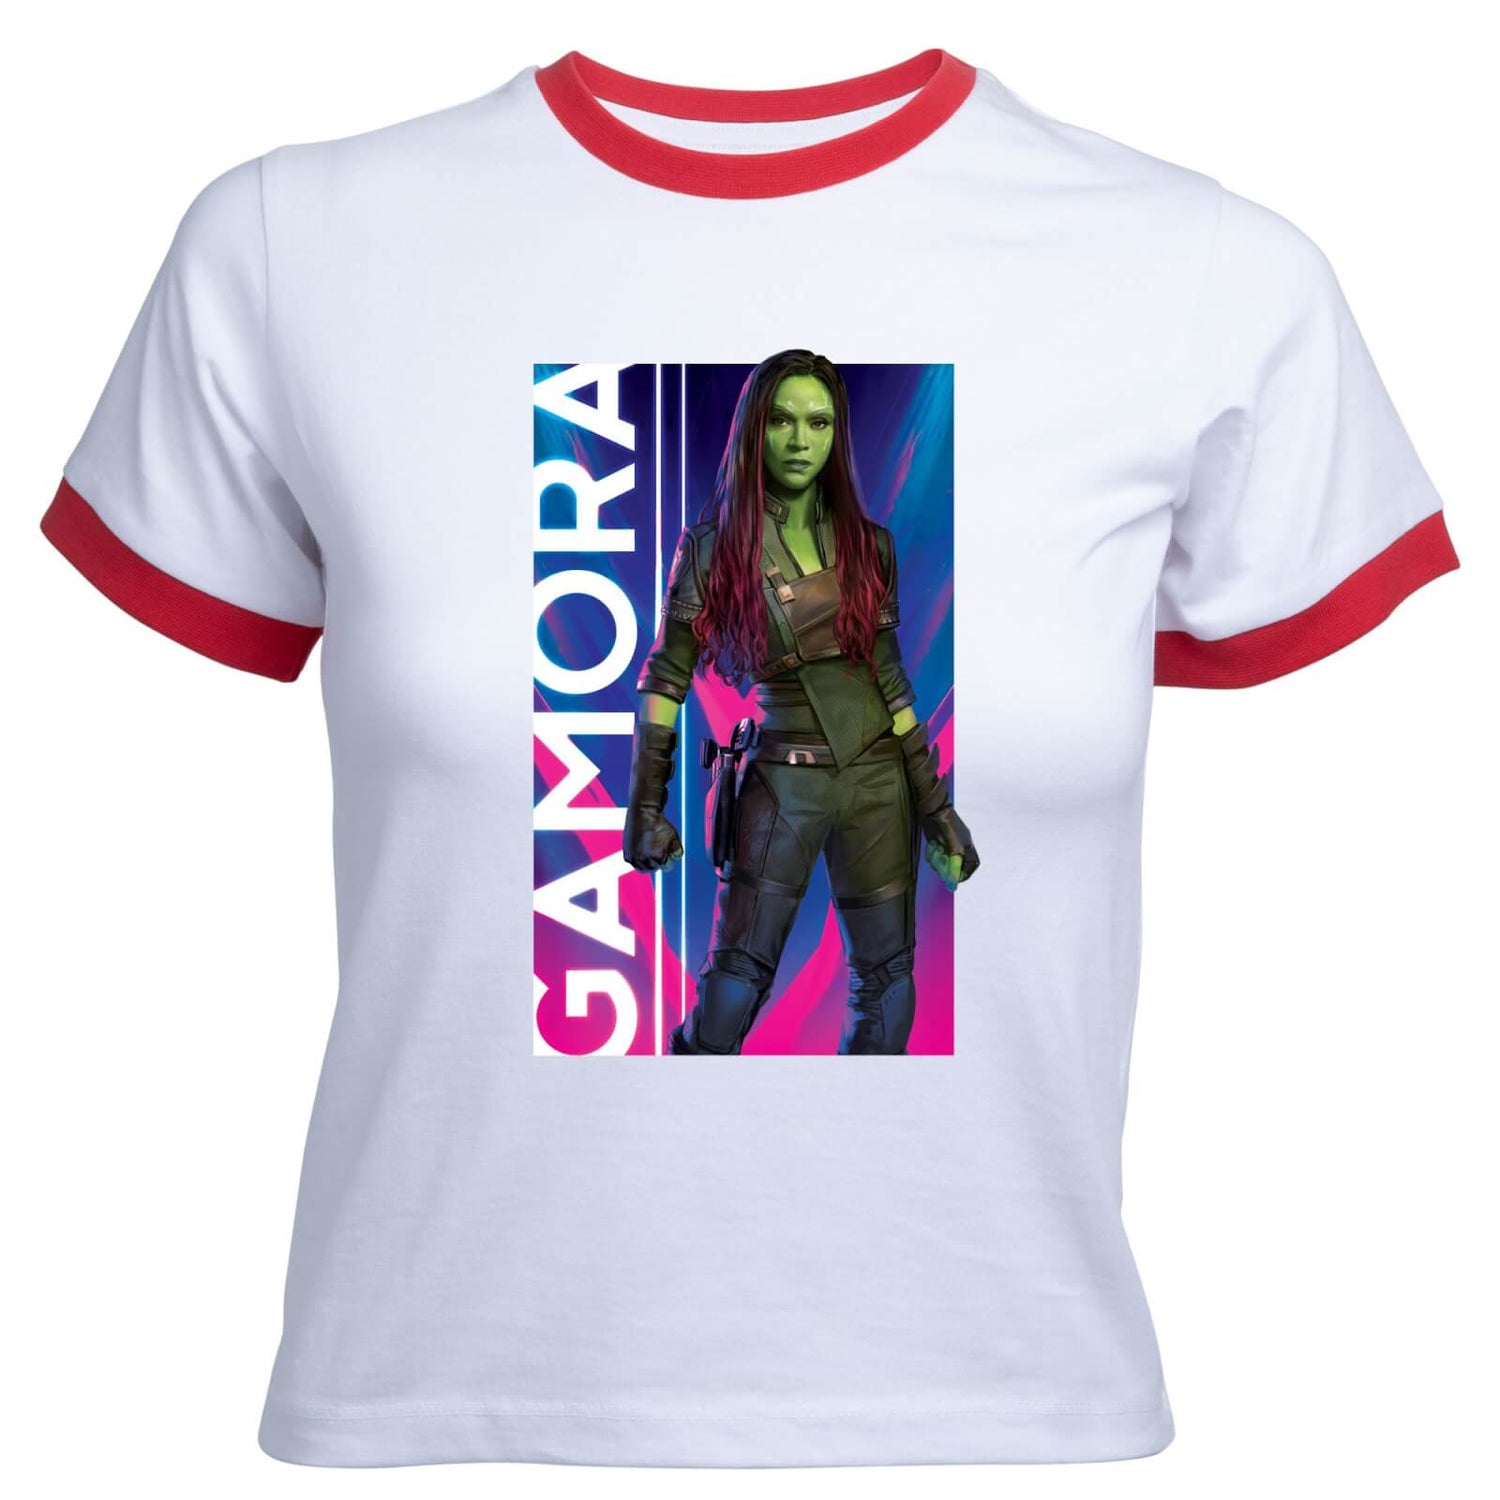 Guardians of the Galaxy Gamora Women's Cropped Ringer T-Shirt - White Red